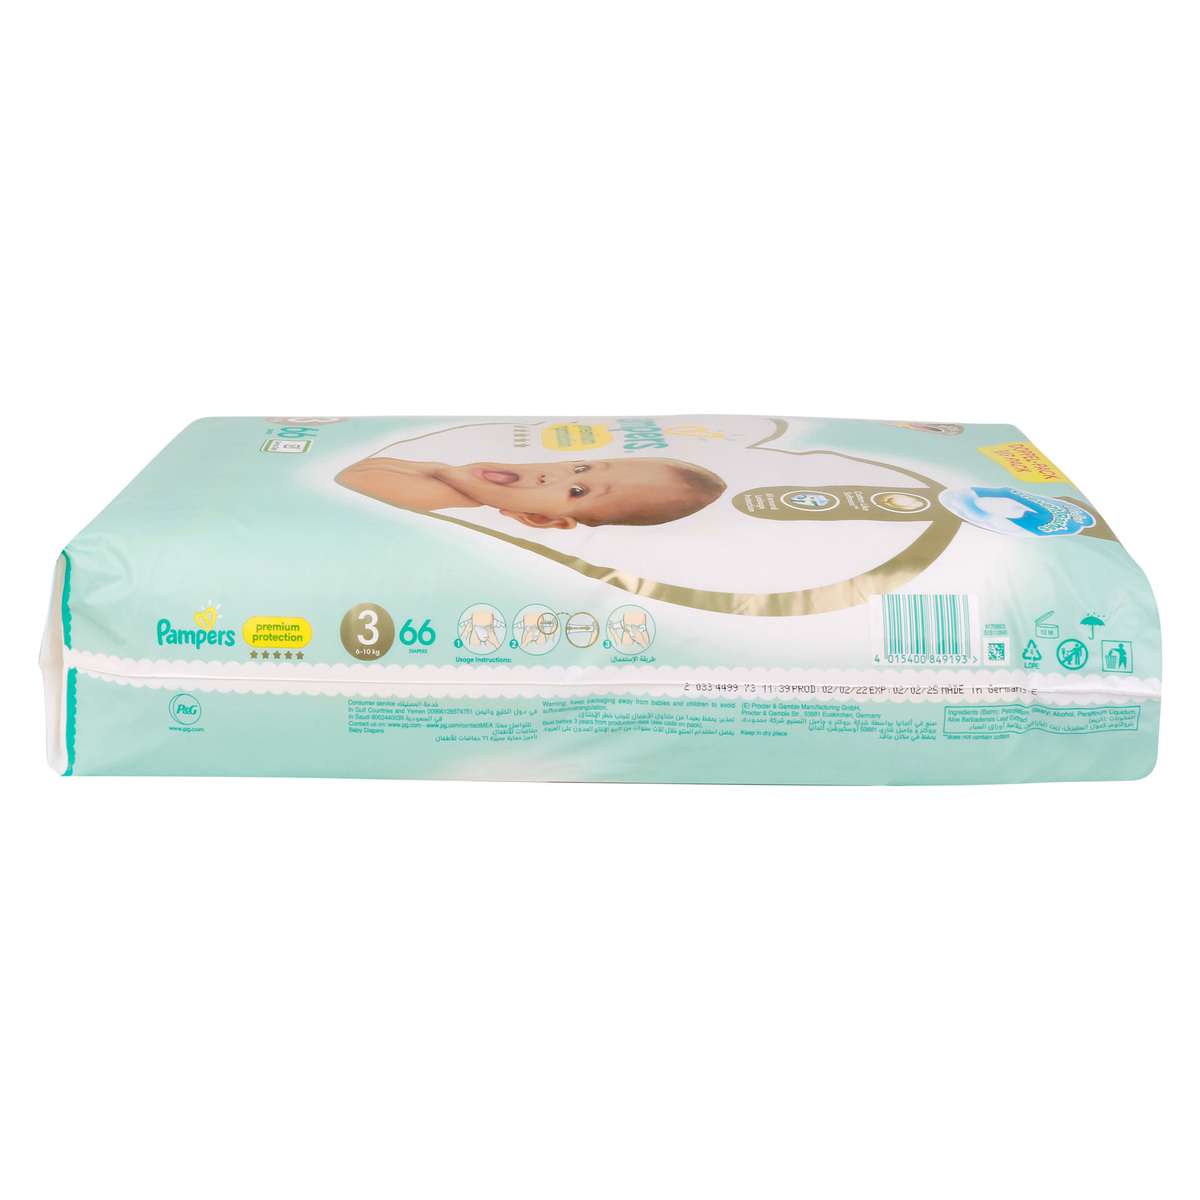 Pampers Premium Baby Diapers Size 3, 6-10kg 66pcs